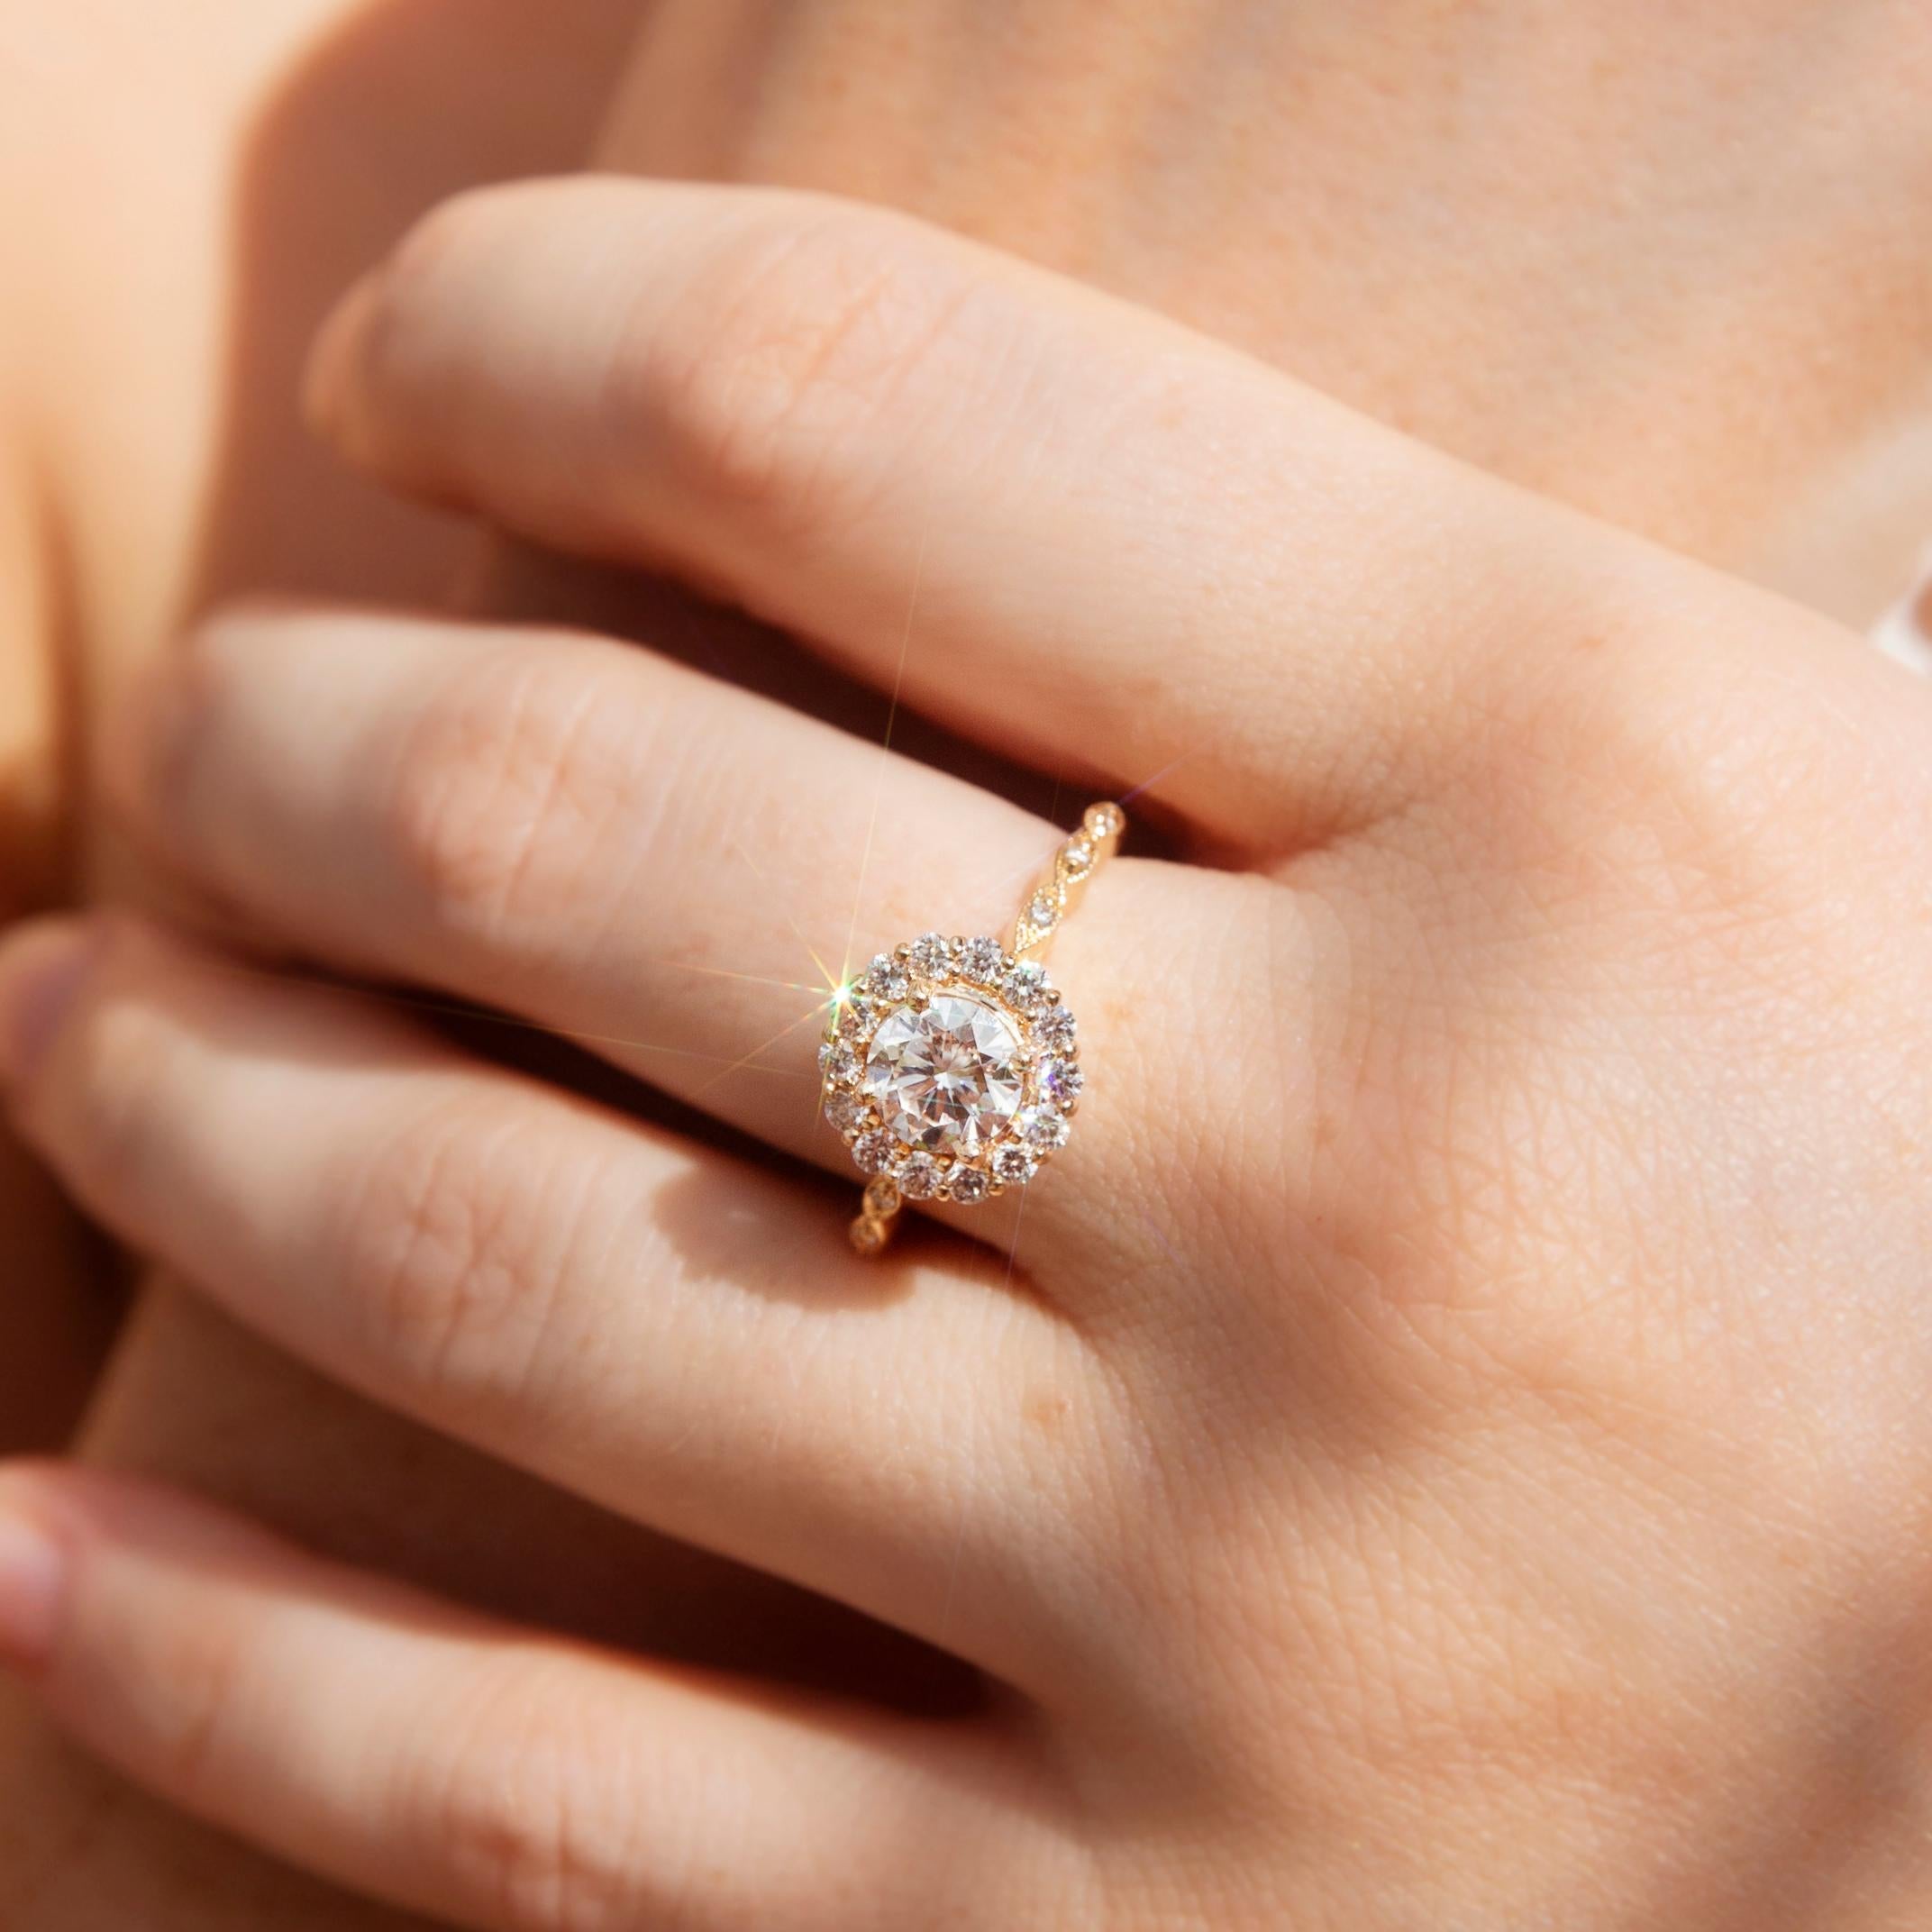 Lovingly crafted in 18 carat yellow gold, this scintillating vintage-inspired halo cluster ring features a gorgeous 1.01-carat GIA-certified round brilliant cut diamond. Around the centrepiece is an enchanting halo border of round brilliant cut